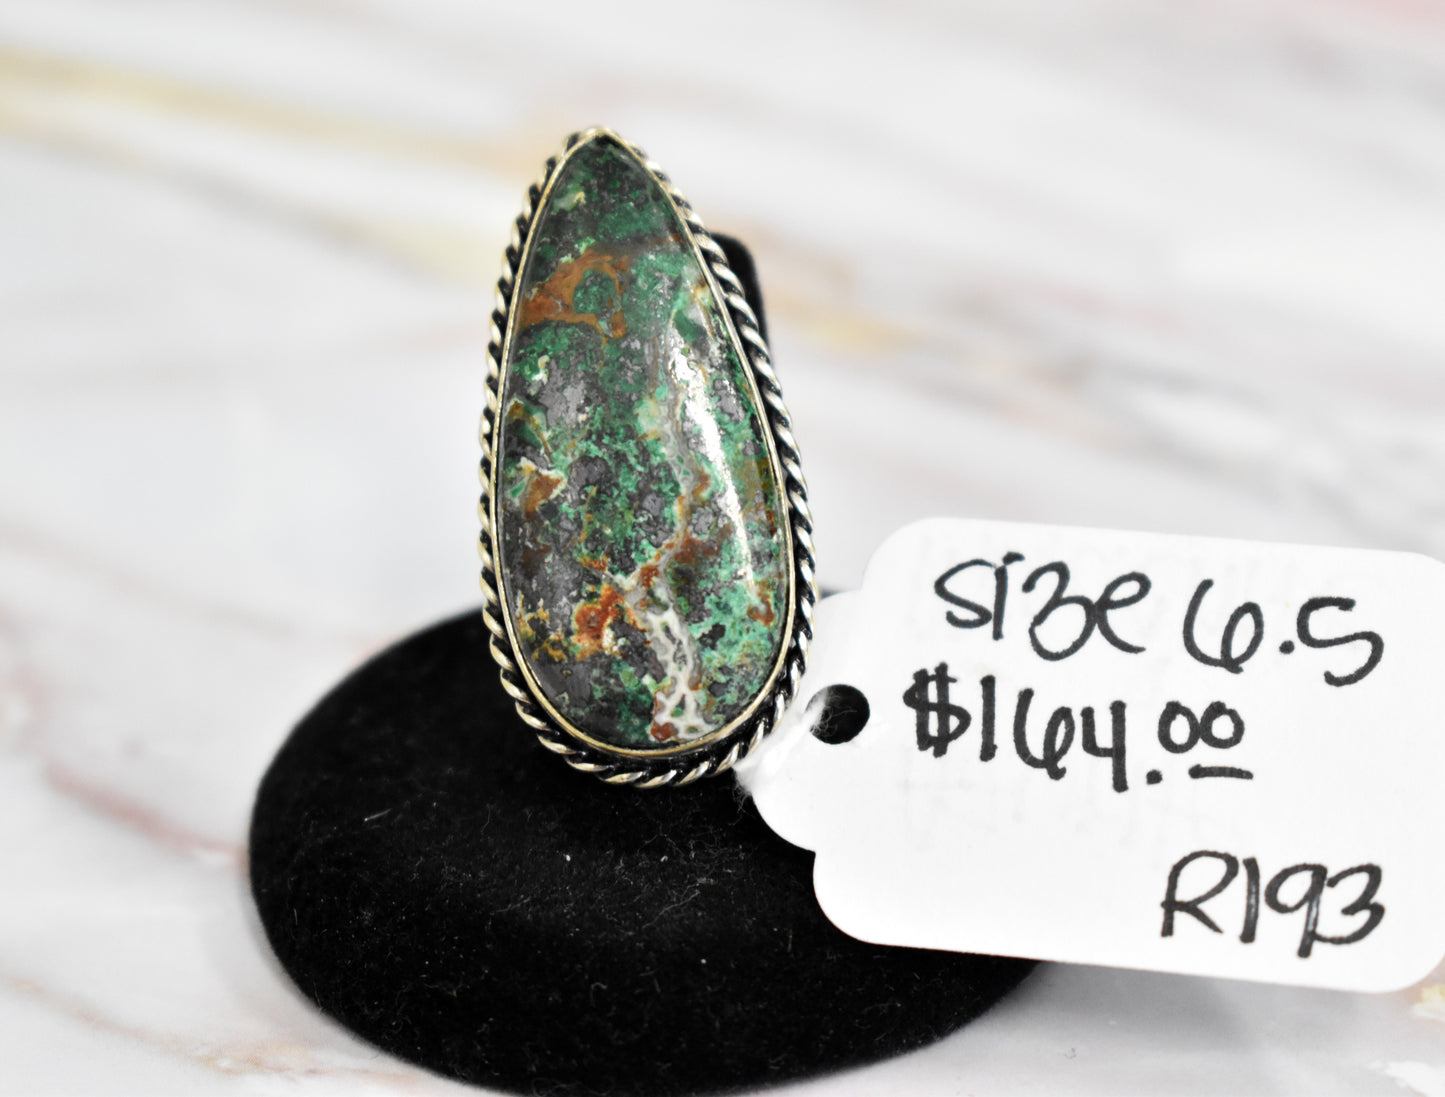 stones-of-transformation - Azurite with Malachite Ring (Size 6.5) - Stones of Transformation - 